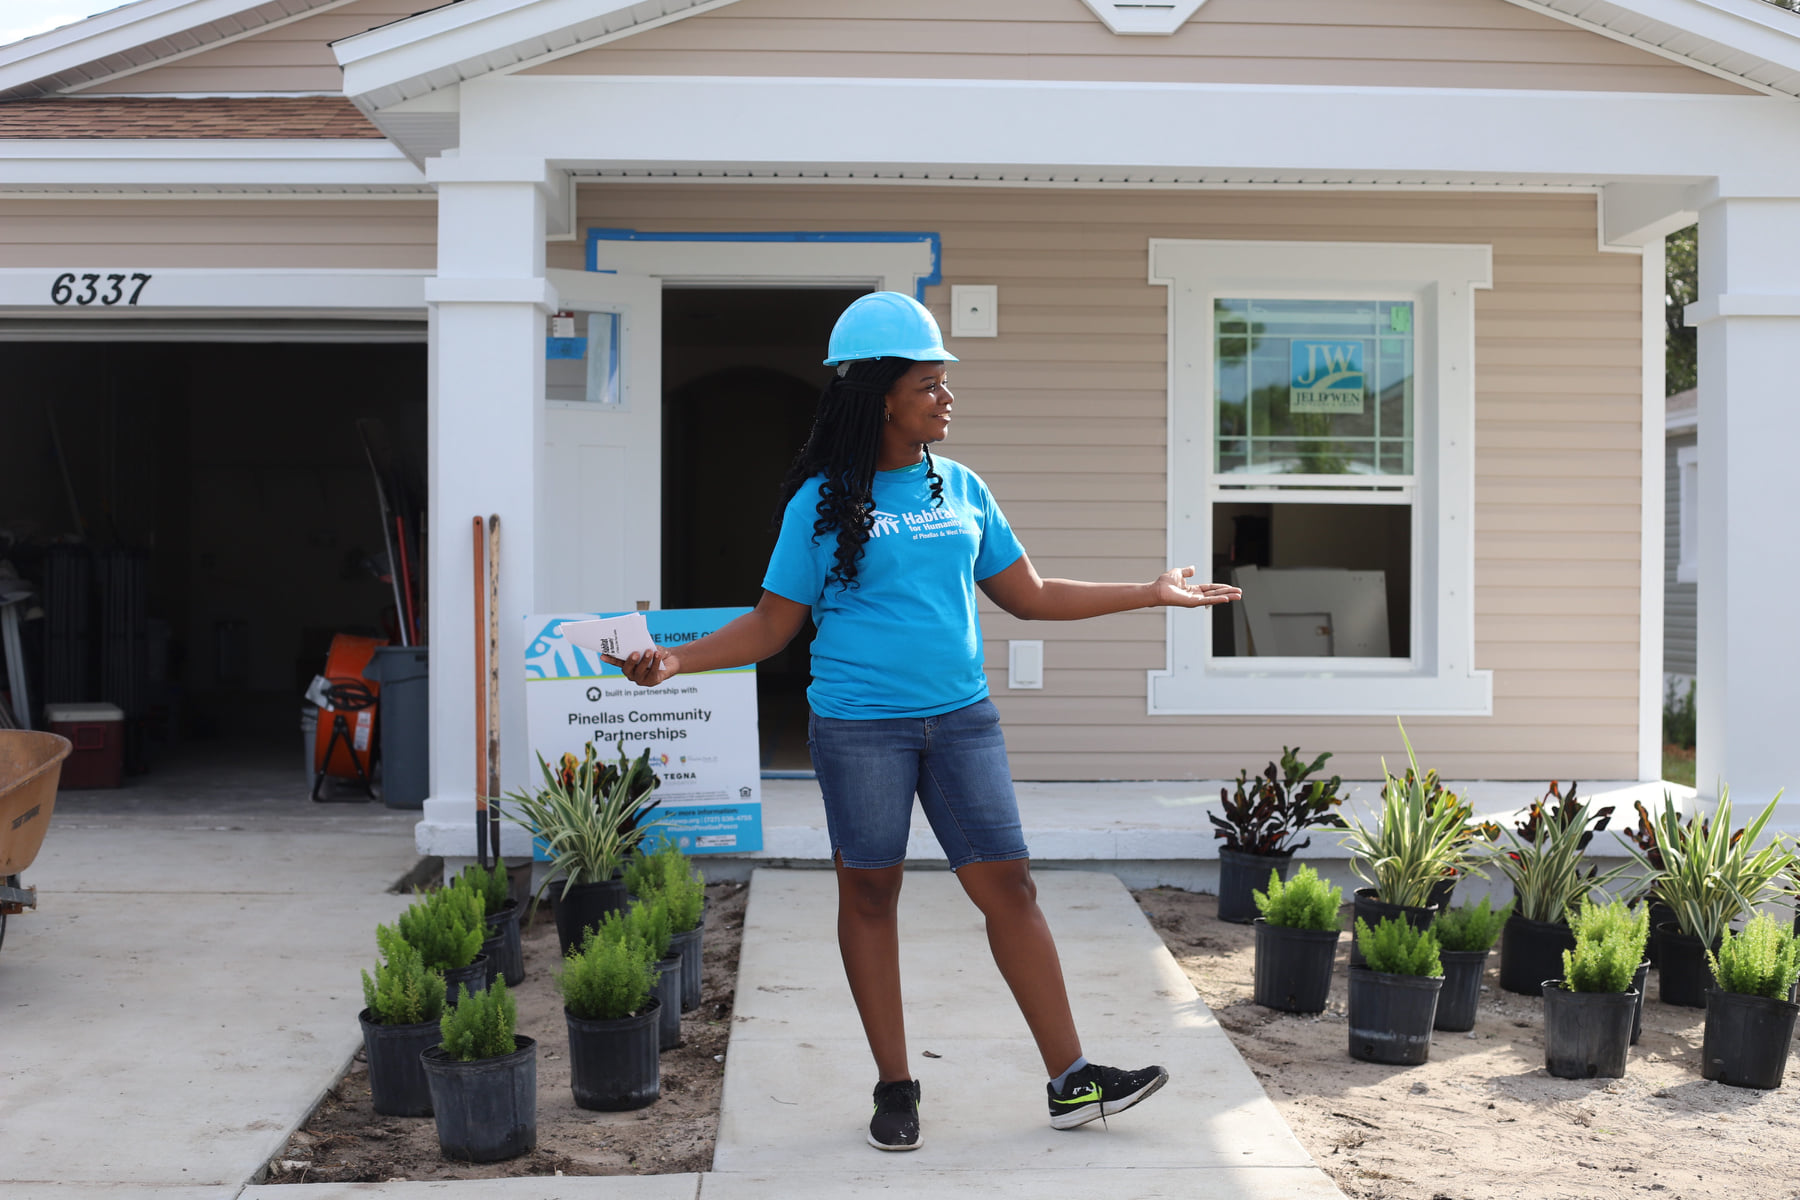 Habitat International Highlights Affiliate for Policy Work in St. Pete